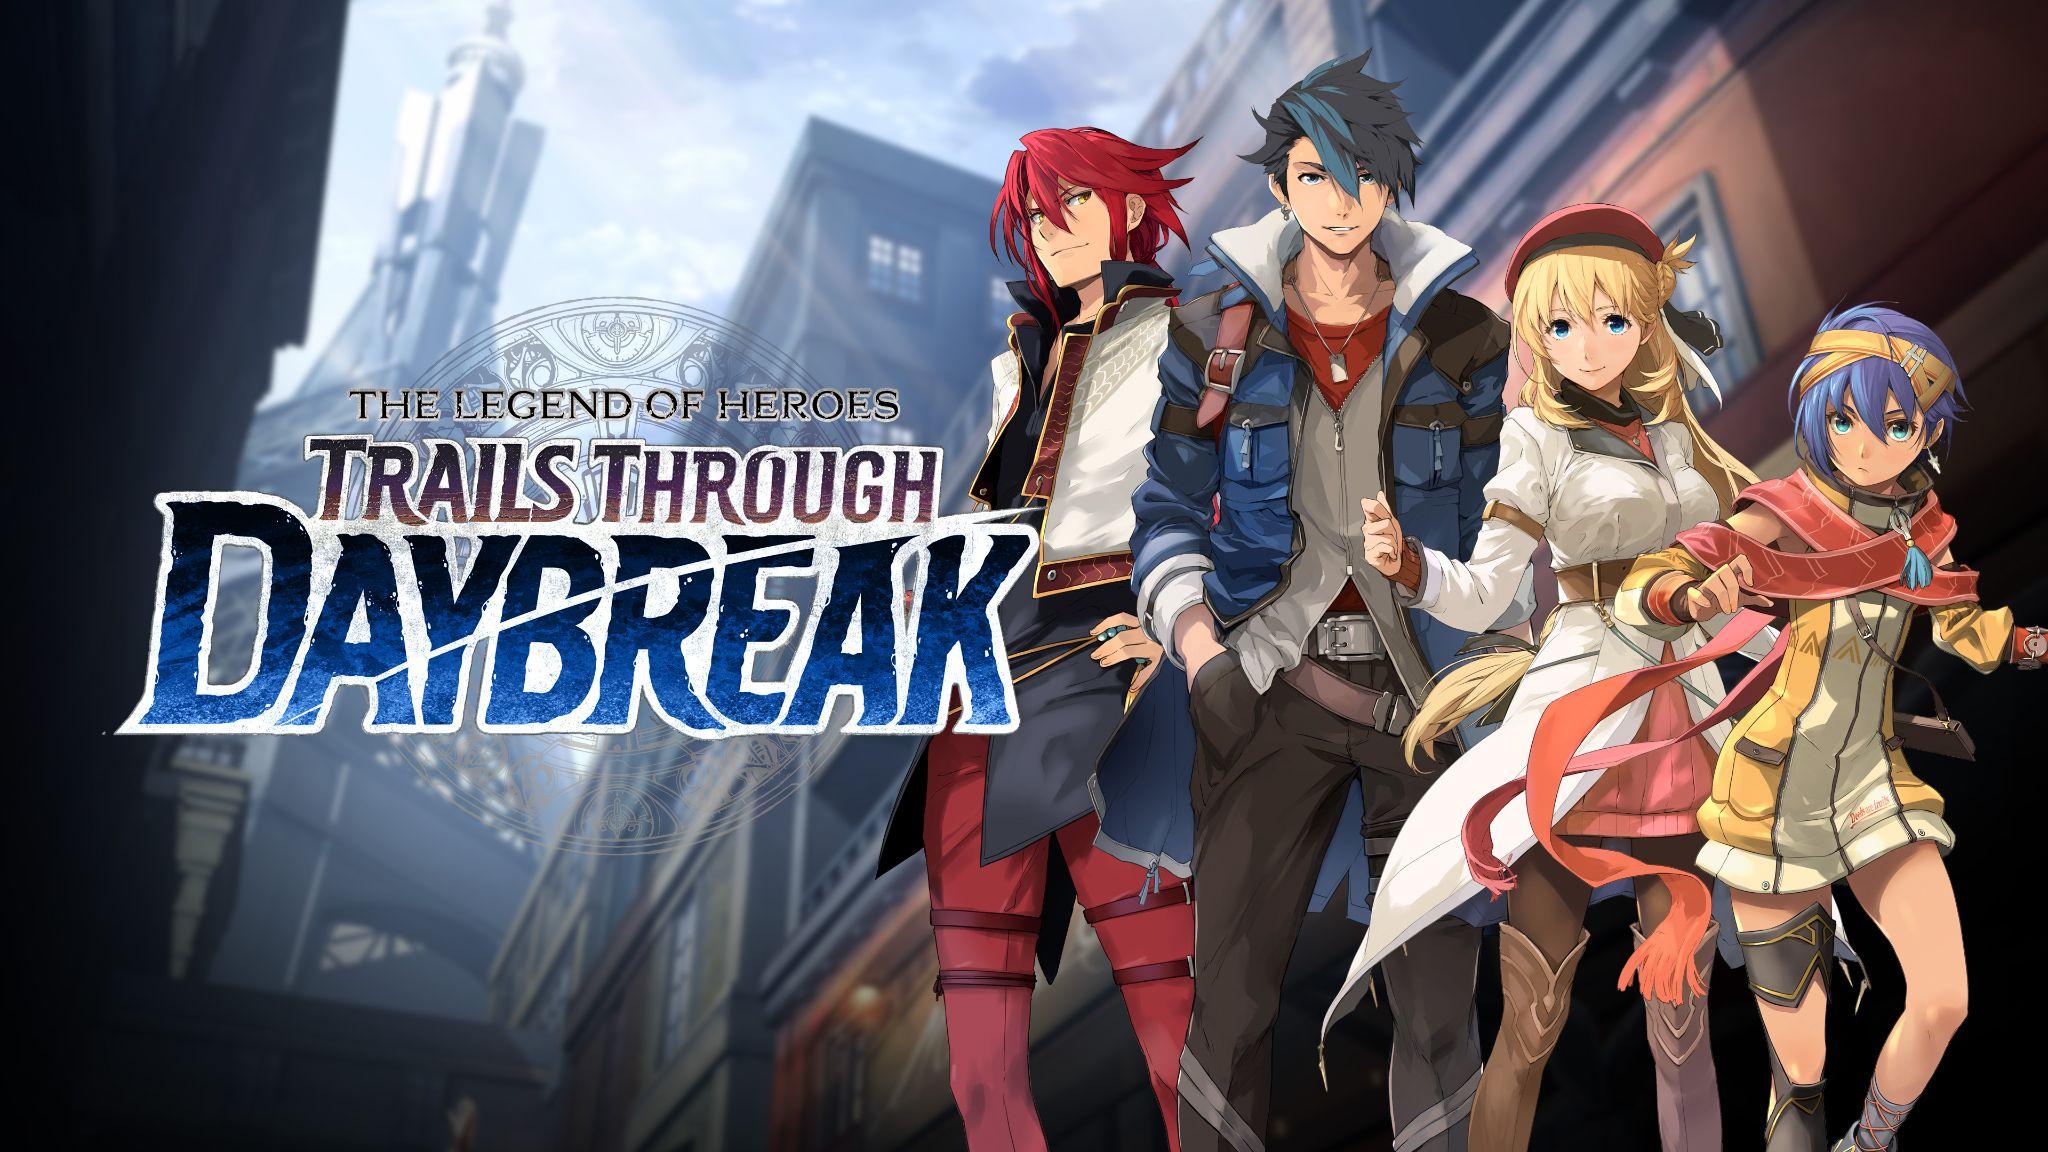 NIS America annuncia The Legend of Heroes: Trails through Daybreak